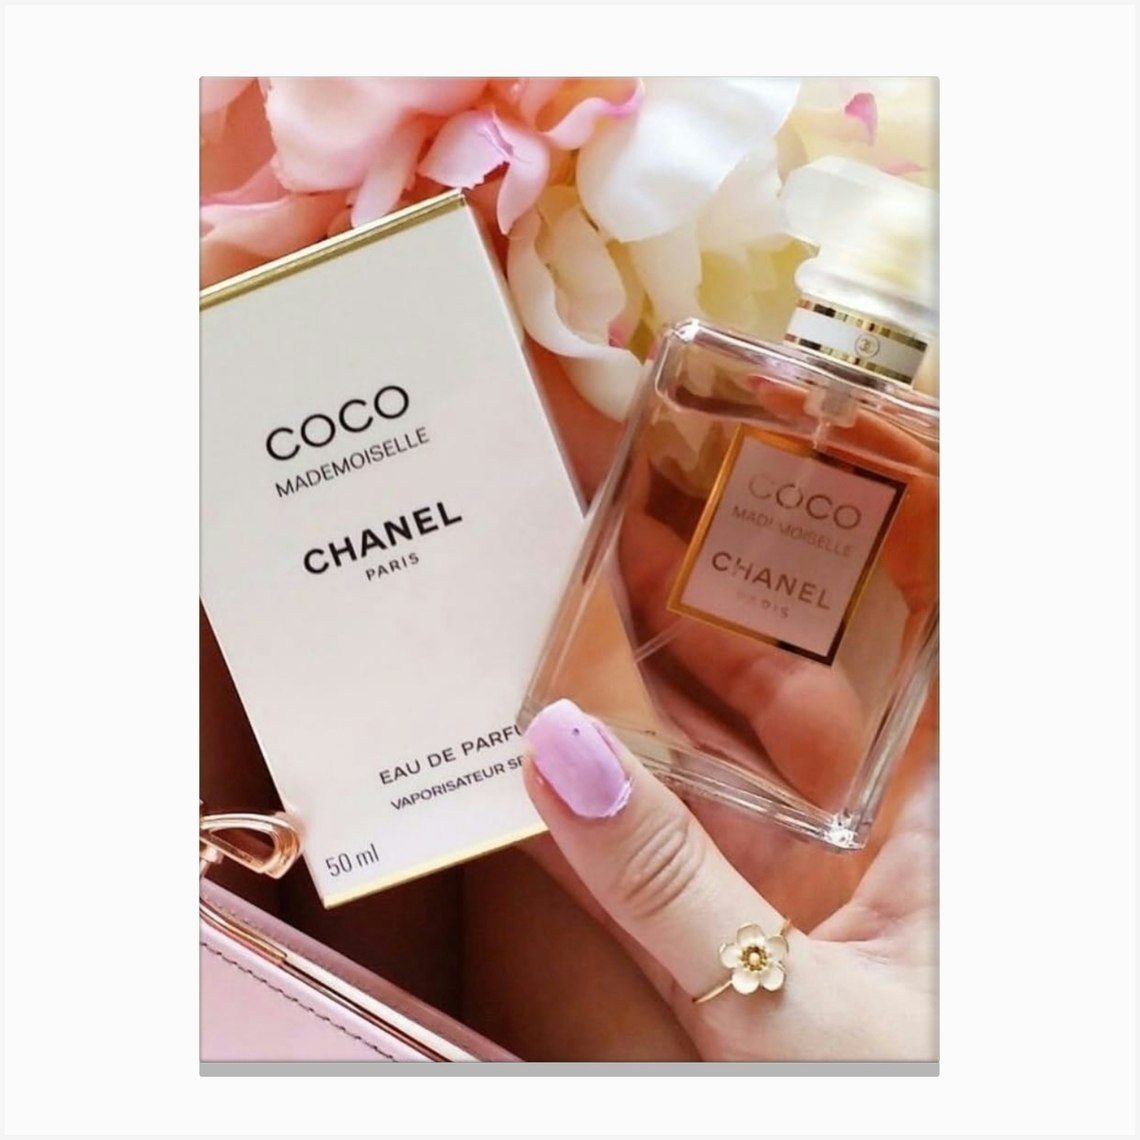 Chanel Coco Mademoiselle Perfume Art: Canvas Prints, Frames & Posters